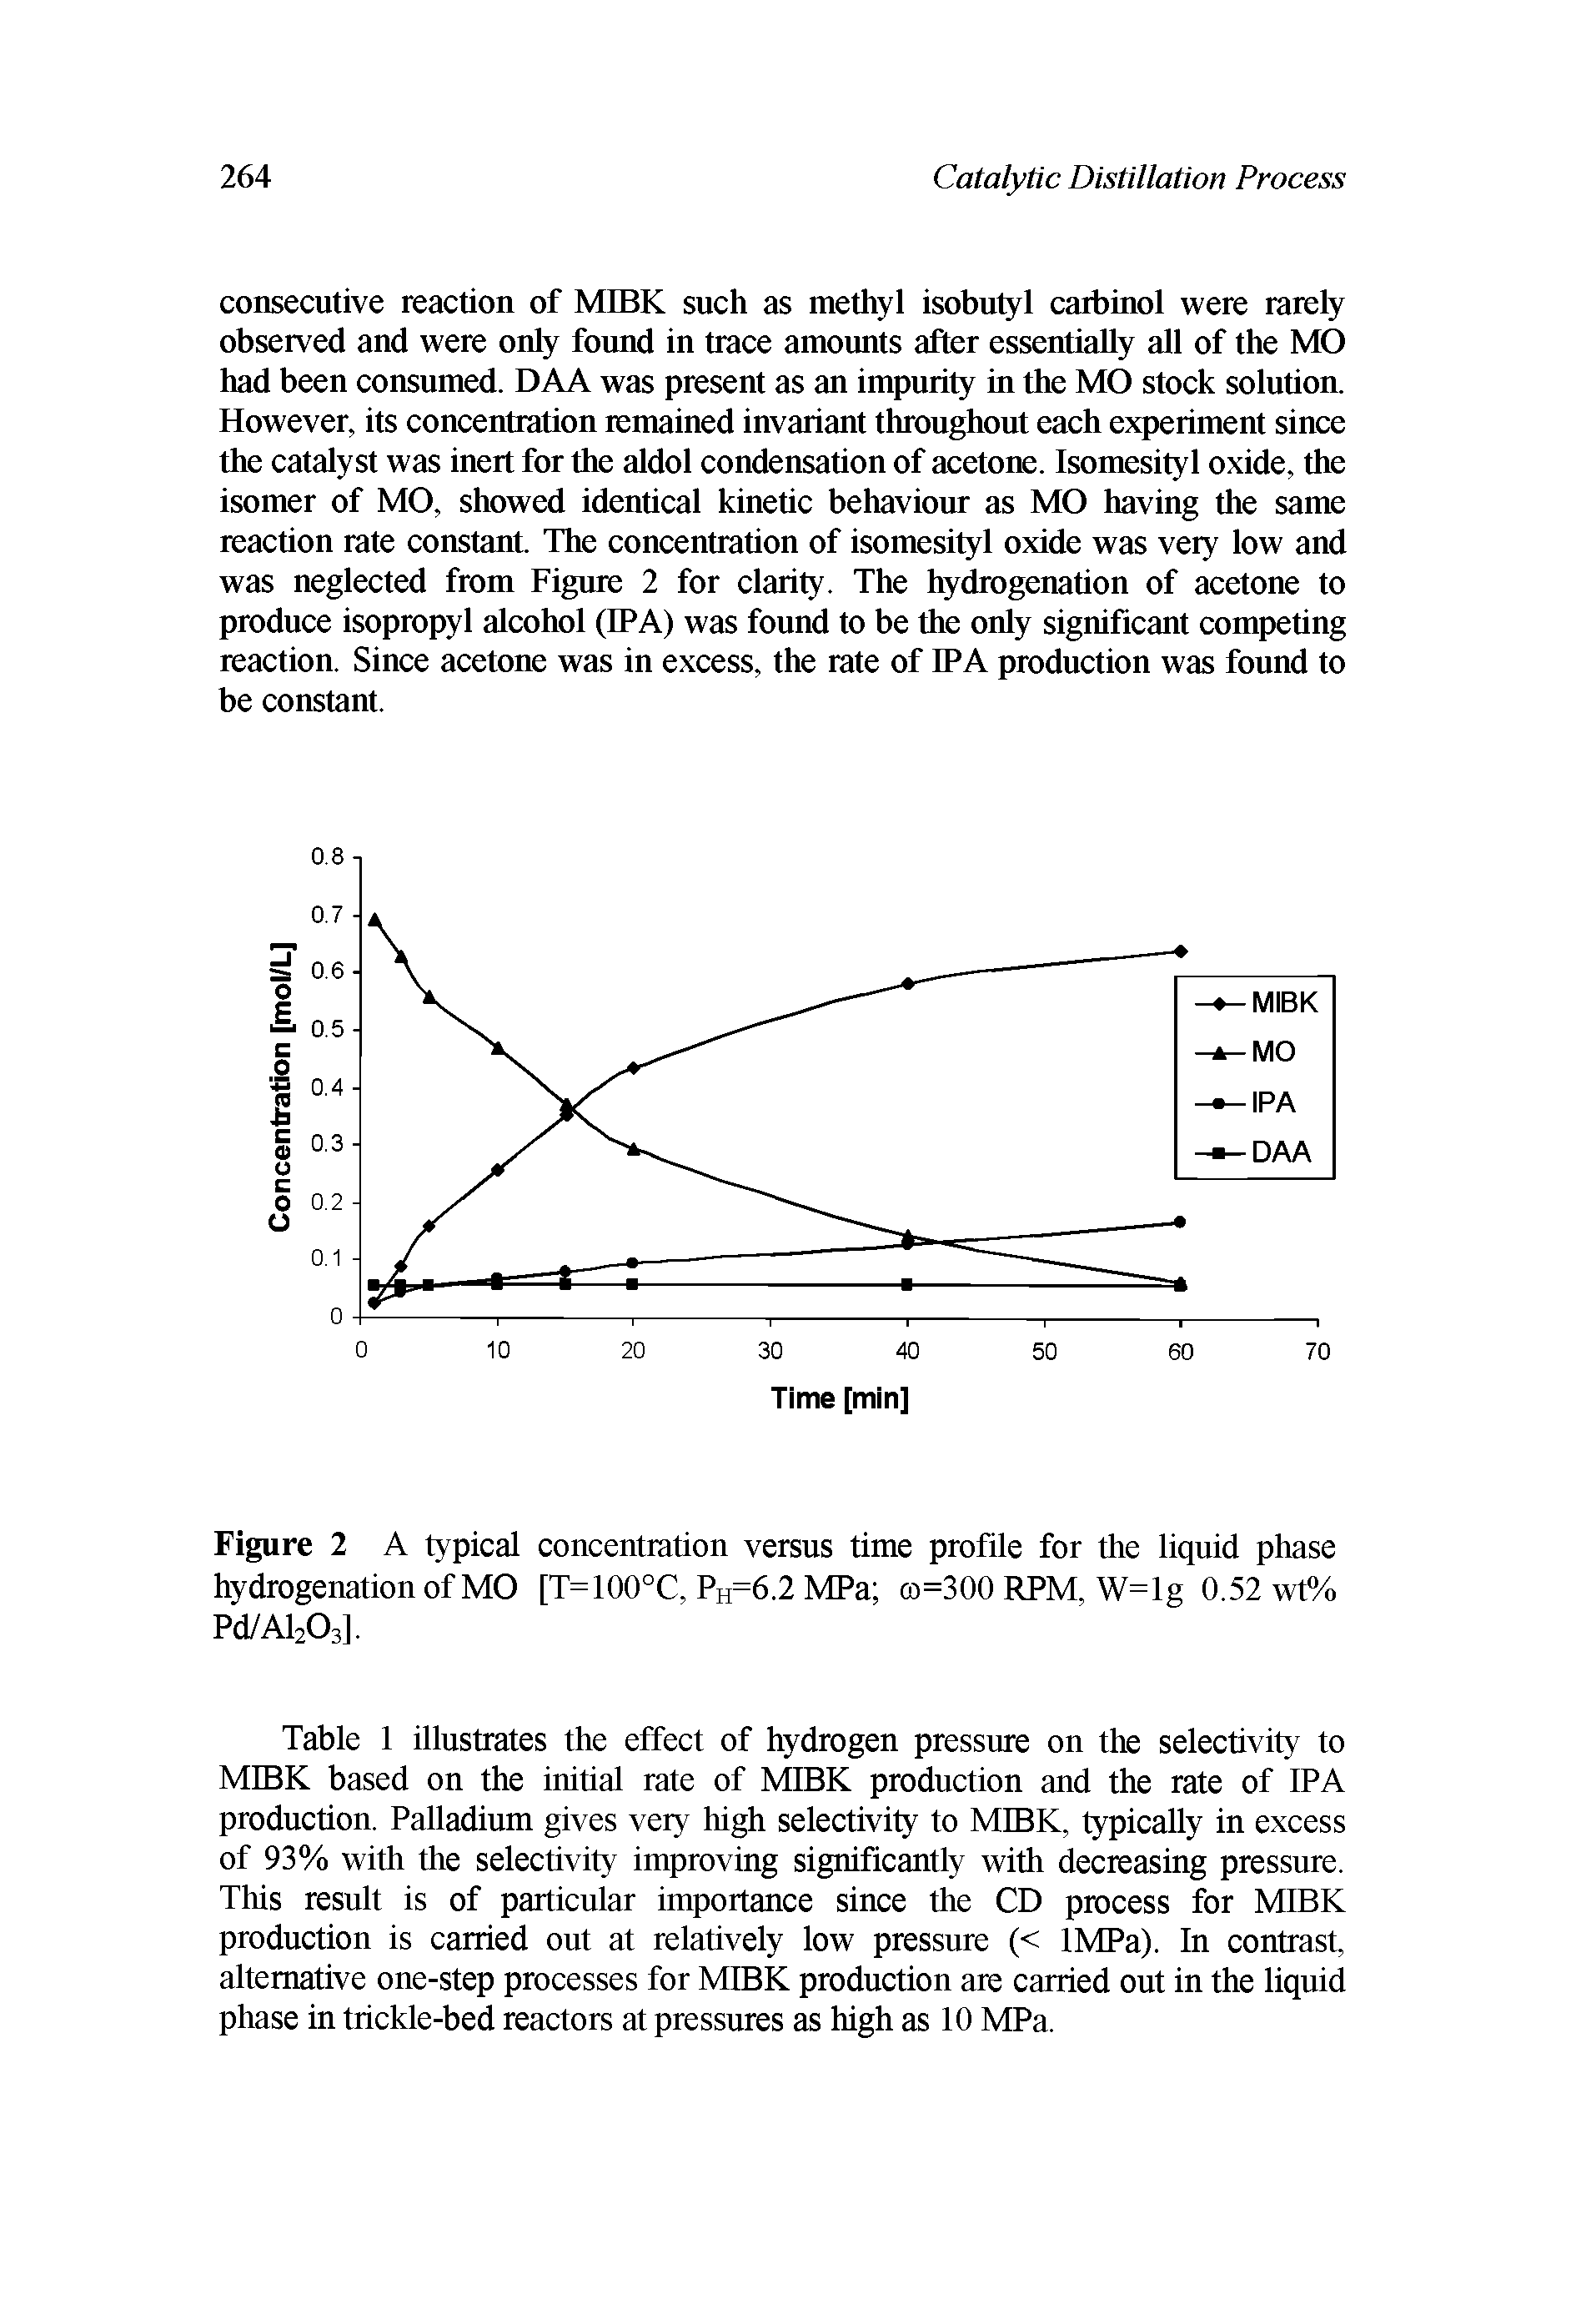 Figure 2 A typical concentration versus time profile for the liquid phase hydrogenation of MO [T=100°C, PH=6.2 MPa ro=300 RPM, W=lg 0.52 wt% Pd/Al203].